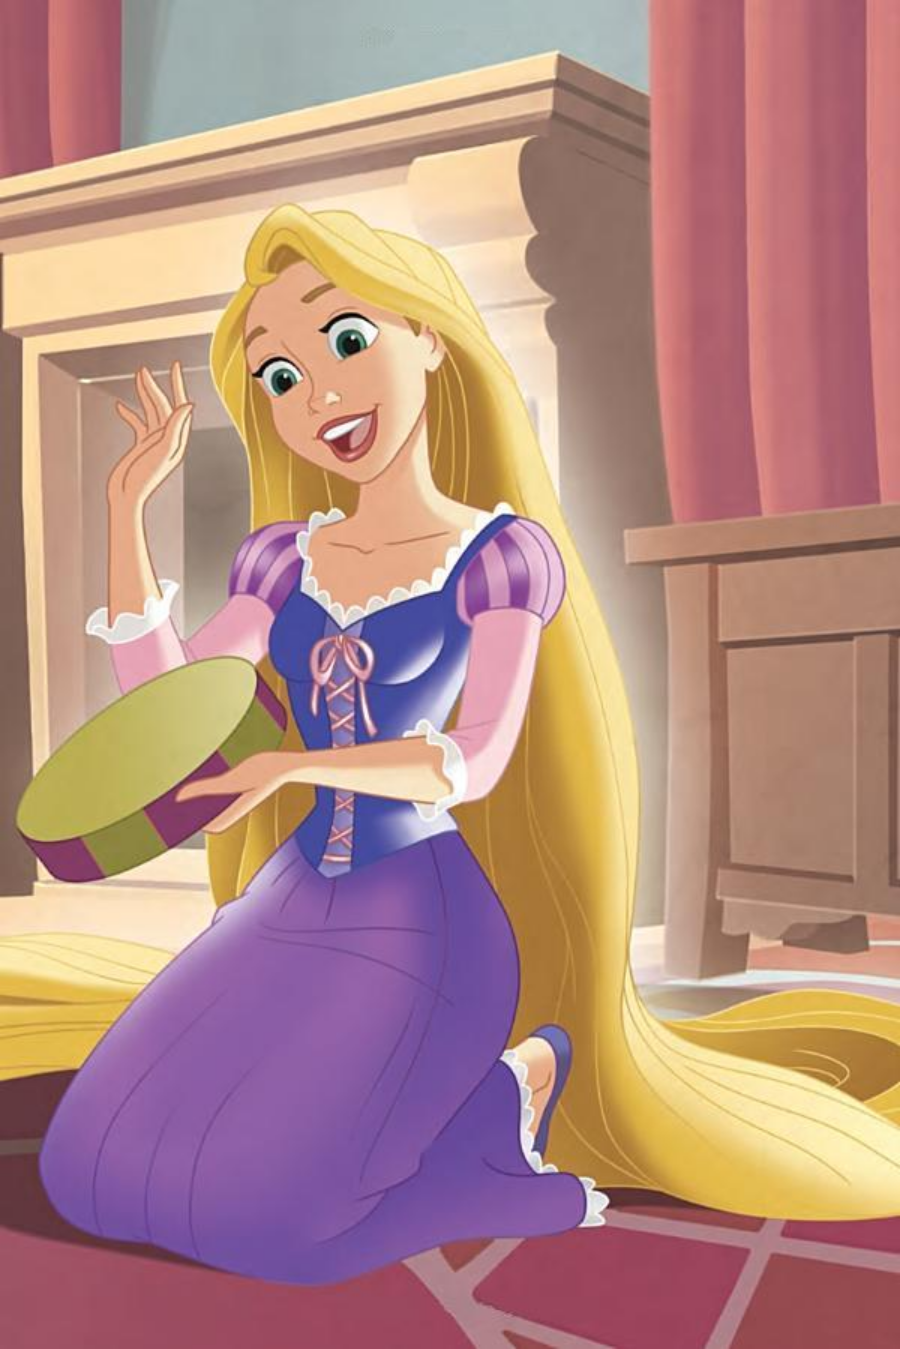 Rapunzel from the classic fairytale